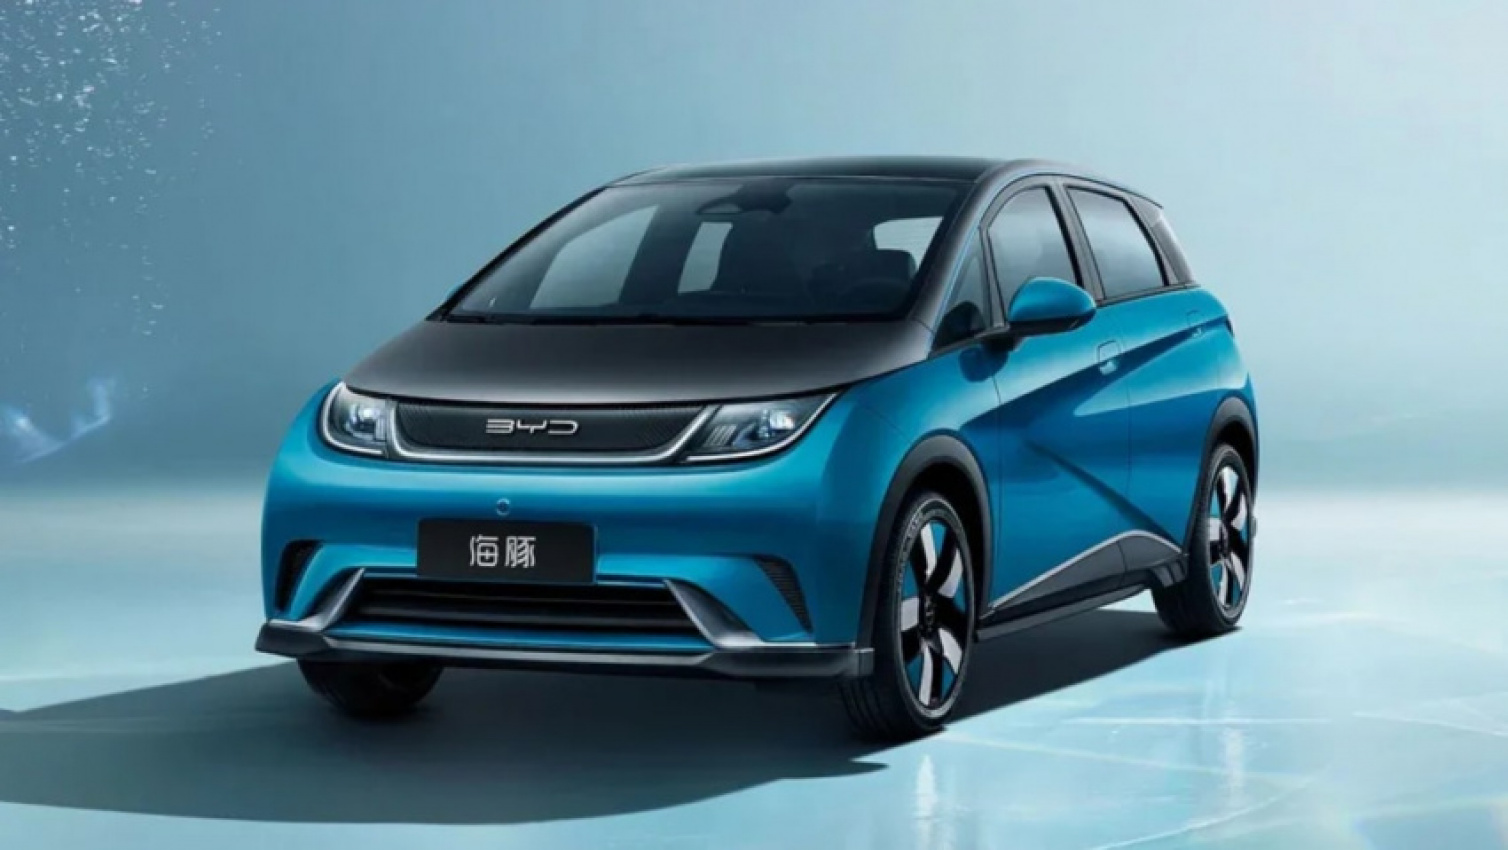 autos, byd, cars, ford, nissan, tesla, byd atto 3, byd atto 3 2022, byd news, electric, electric cars, hatchback, industry news, showroom news, tesla model 3, timing revealed for byd dolphin and seal electric cars: more affordable chinese rivals to nissan leaf, tesla model 3 to go on sale in australia this year